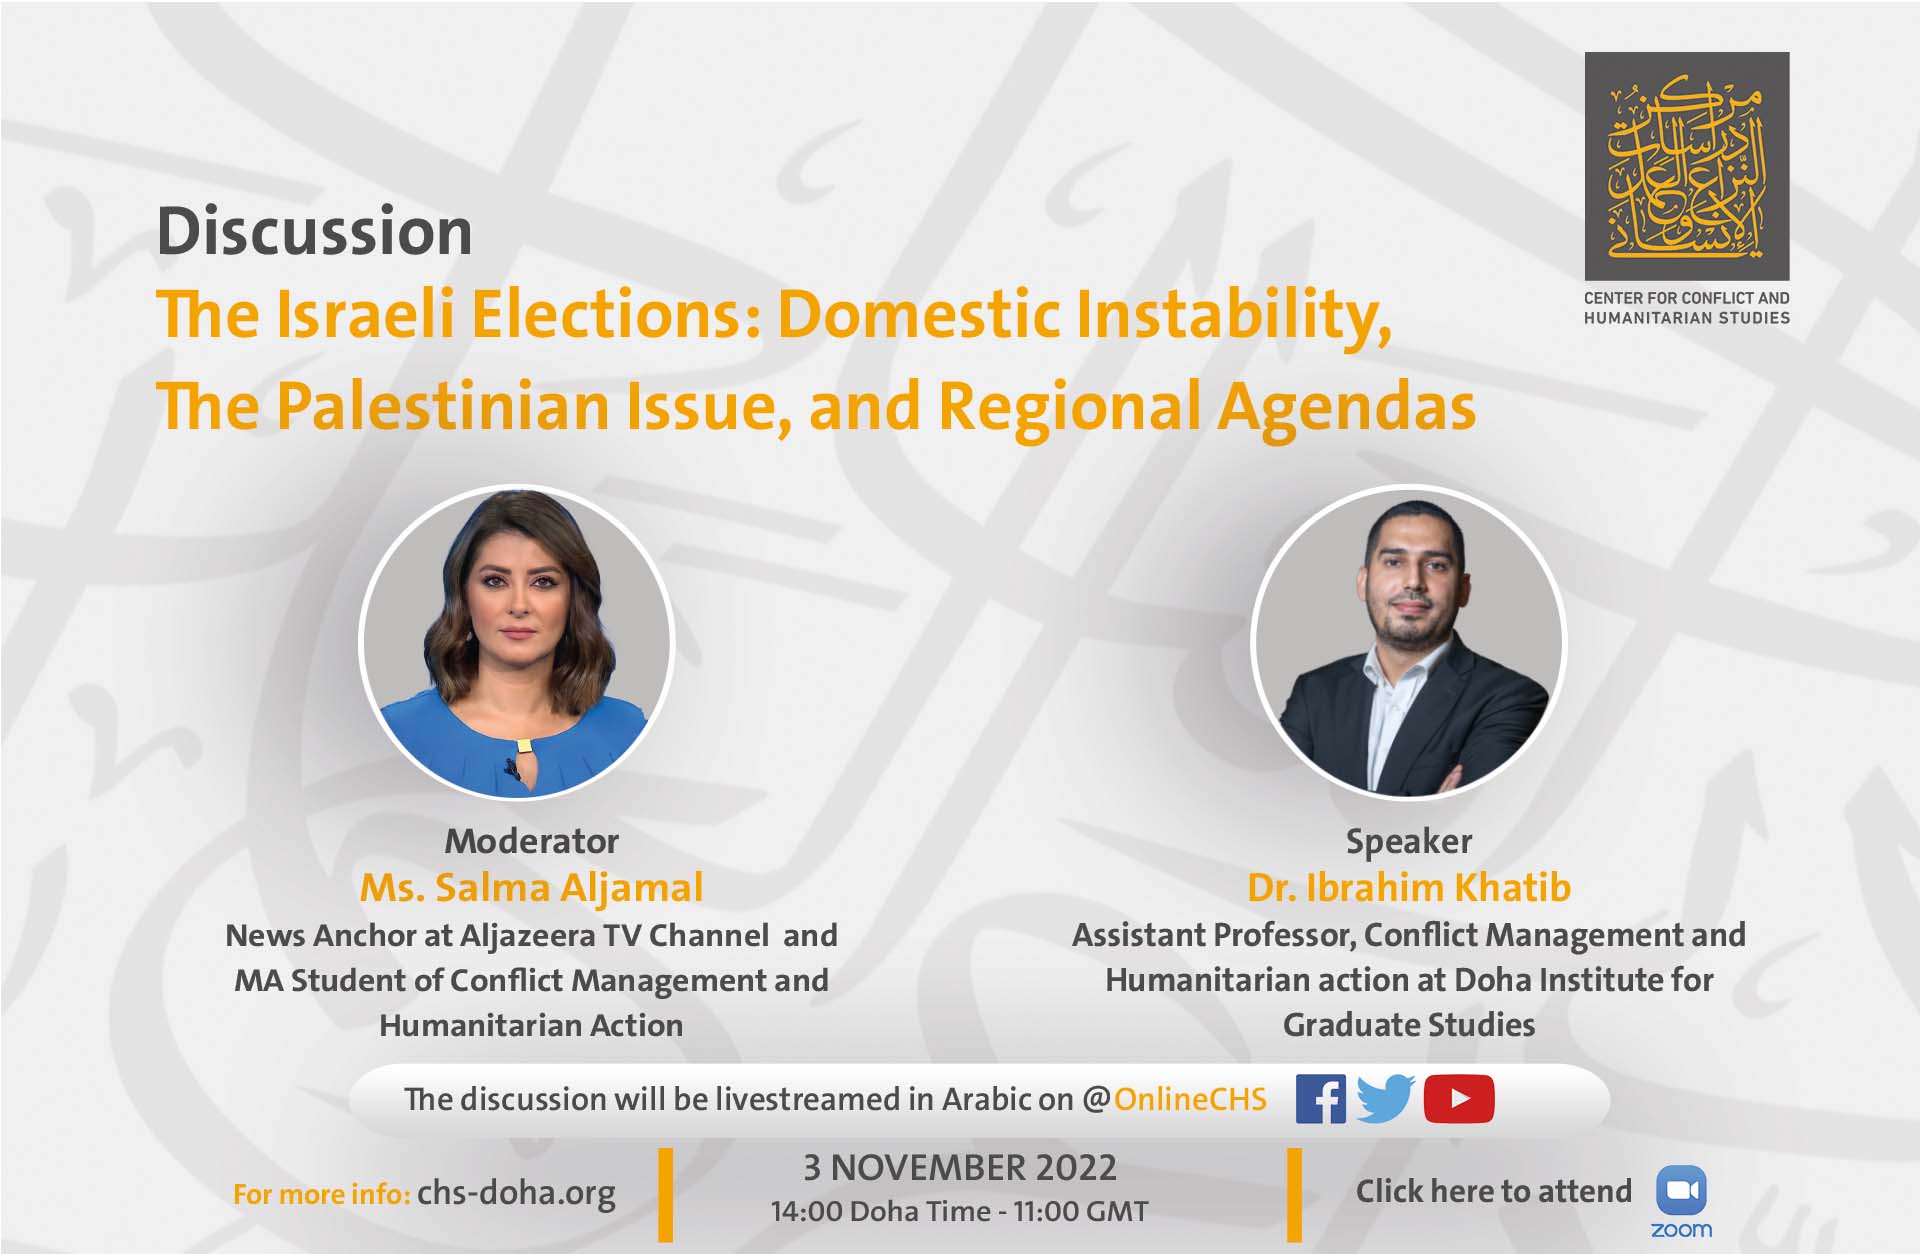 The Israeli Elections: Domestic Instability, the Palestinian Issue, and Regional Agendas